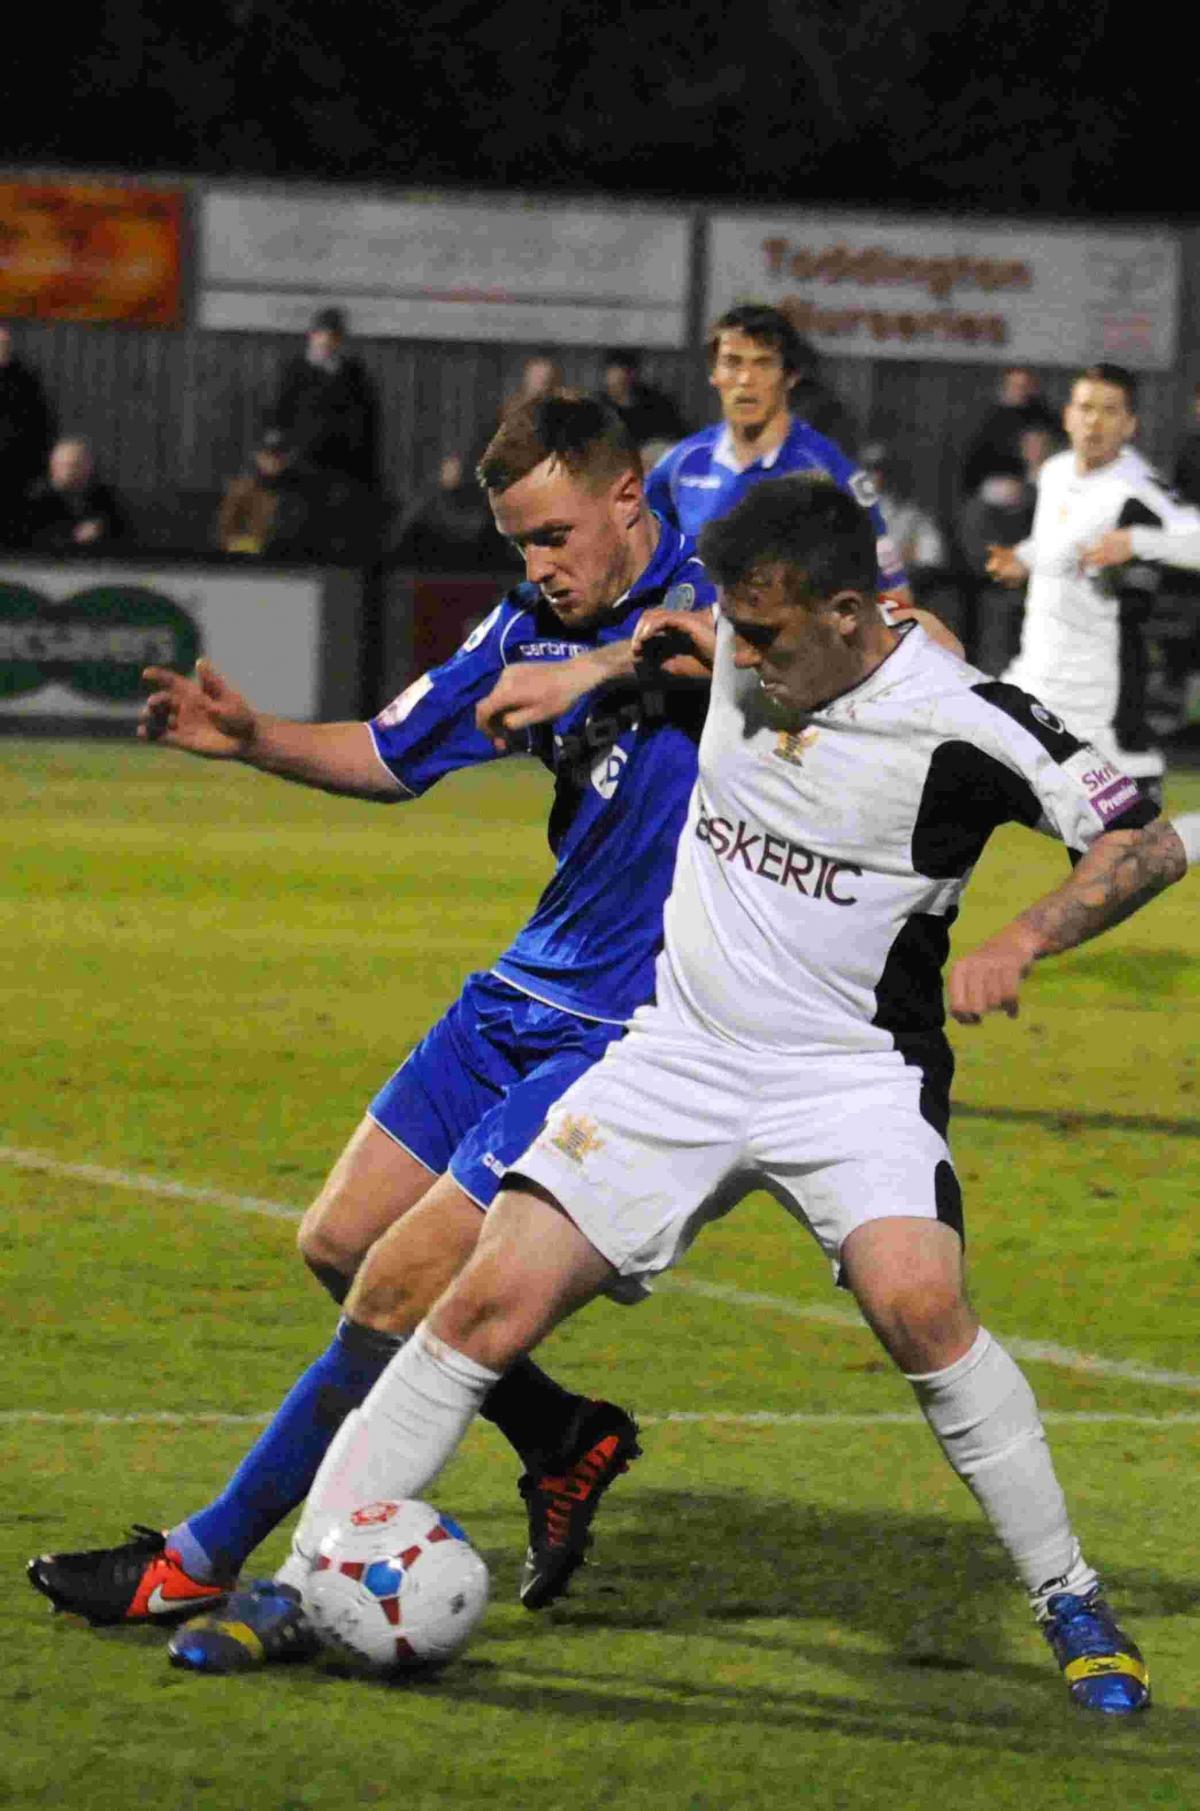 Relive Salisbury's thrilling 3-2 win over Macclesfield Town